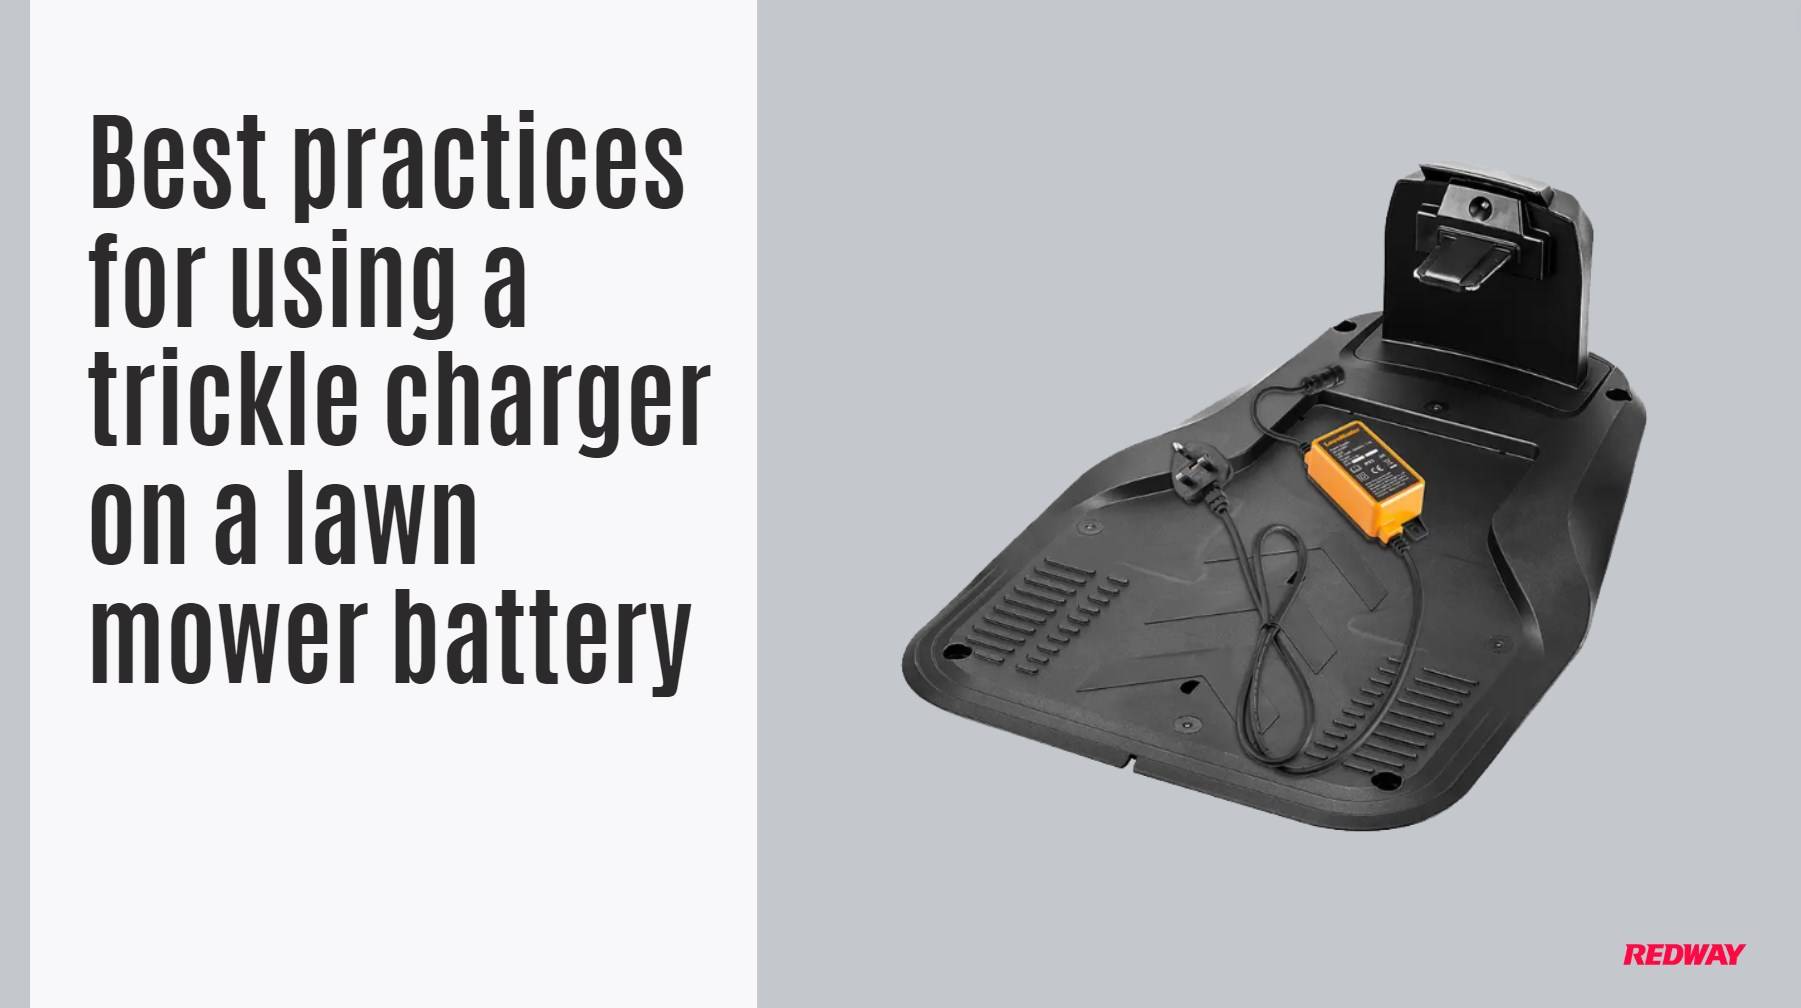 Best practices for using a trickle charger on a lawn mower battery. Leave A Trickle Charger On A Lawn Mower Battery